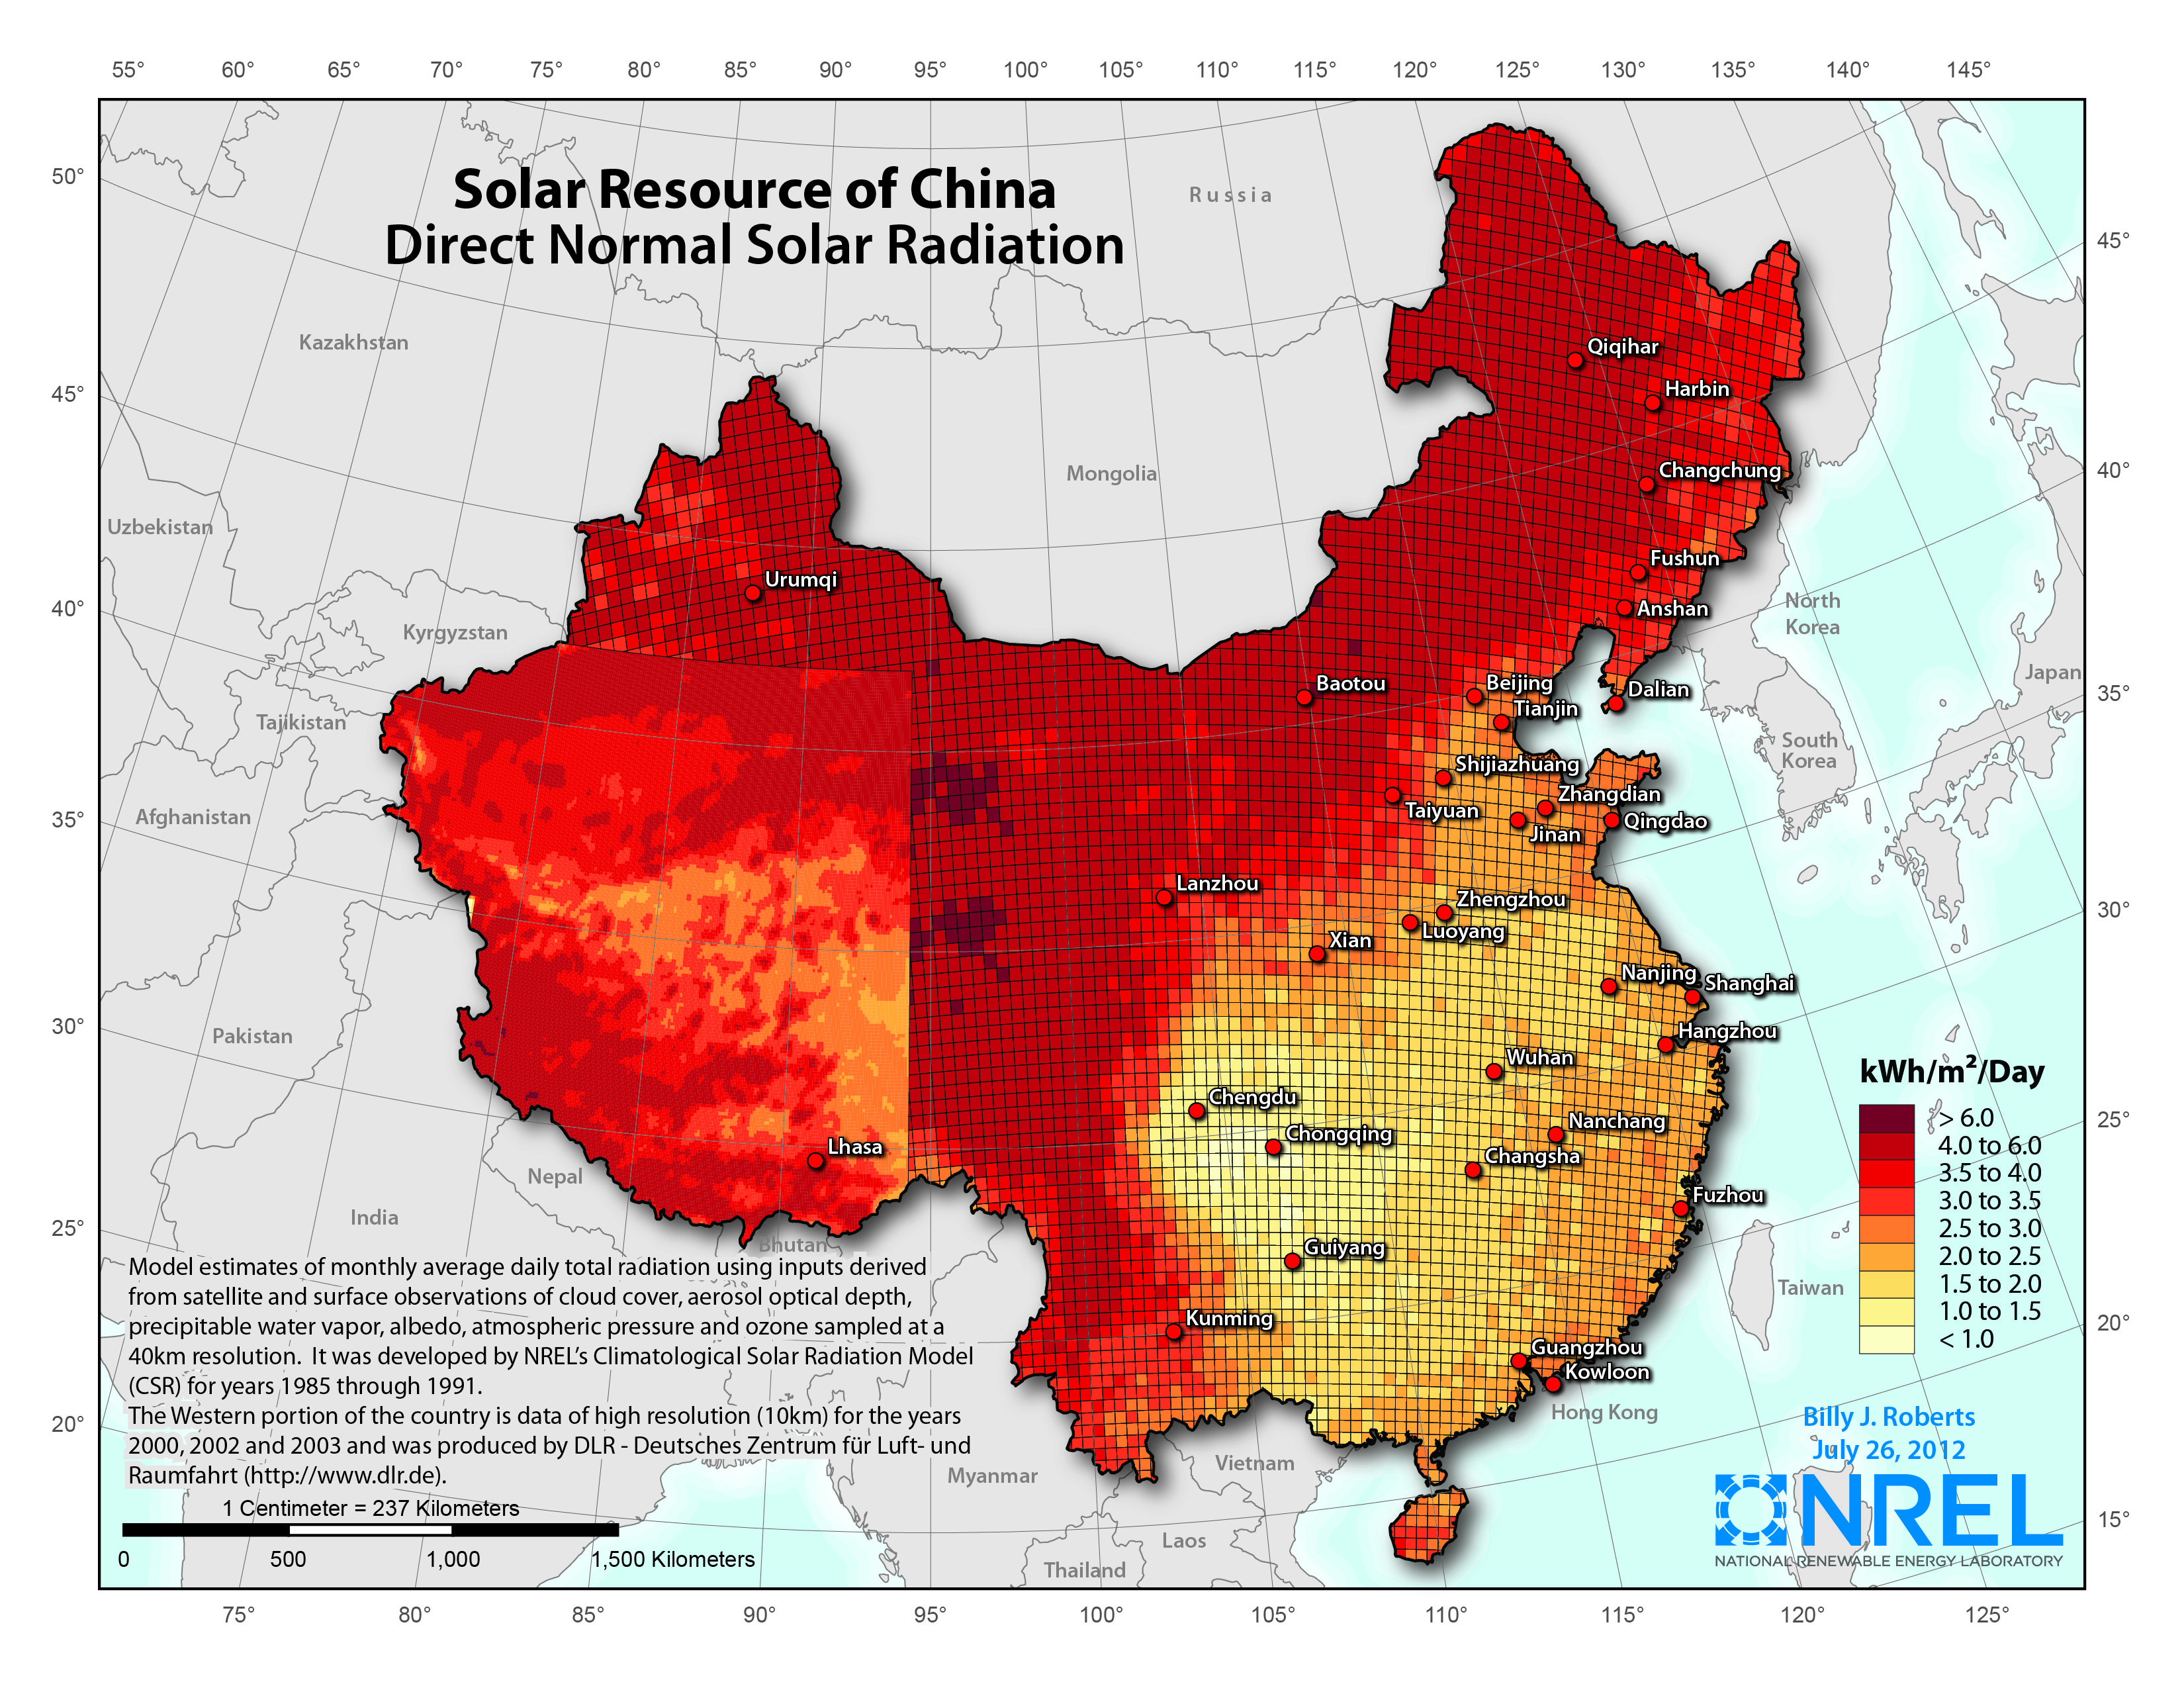 Lightly-populated central and northern China has tremendous utility-scale solar power potential, which the large cities in the Southeast have adequate rooftop solar potential.